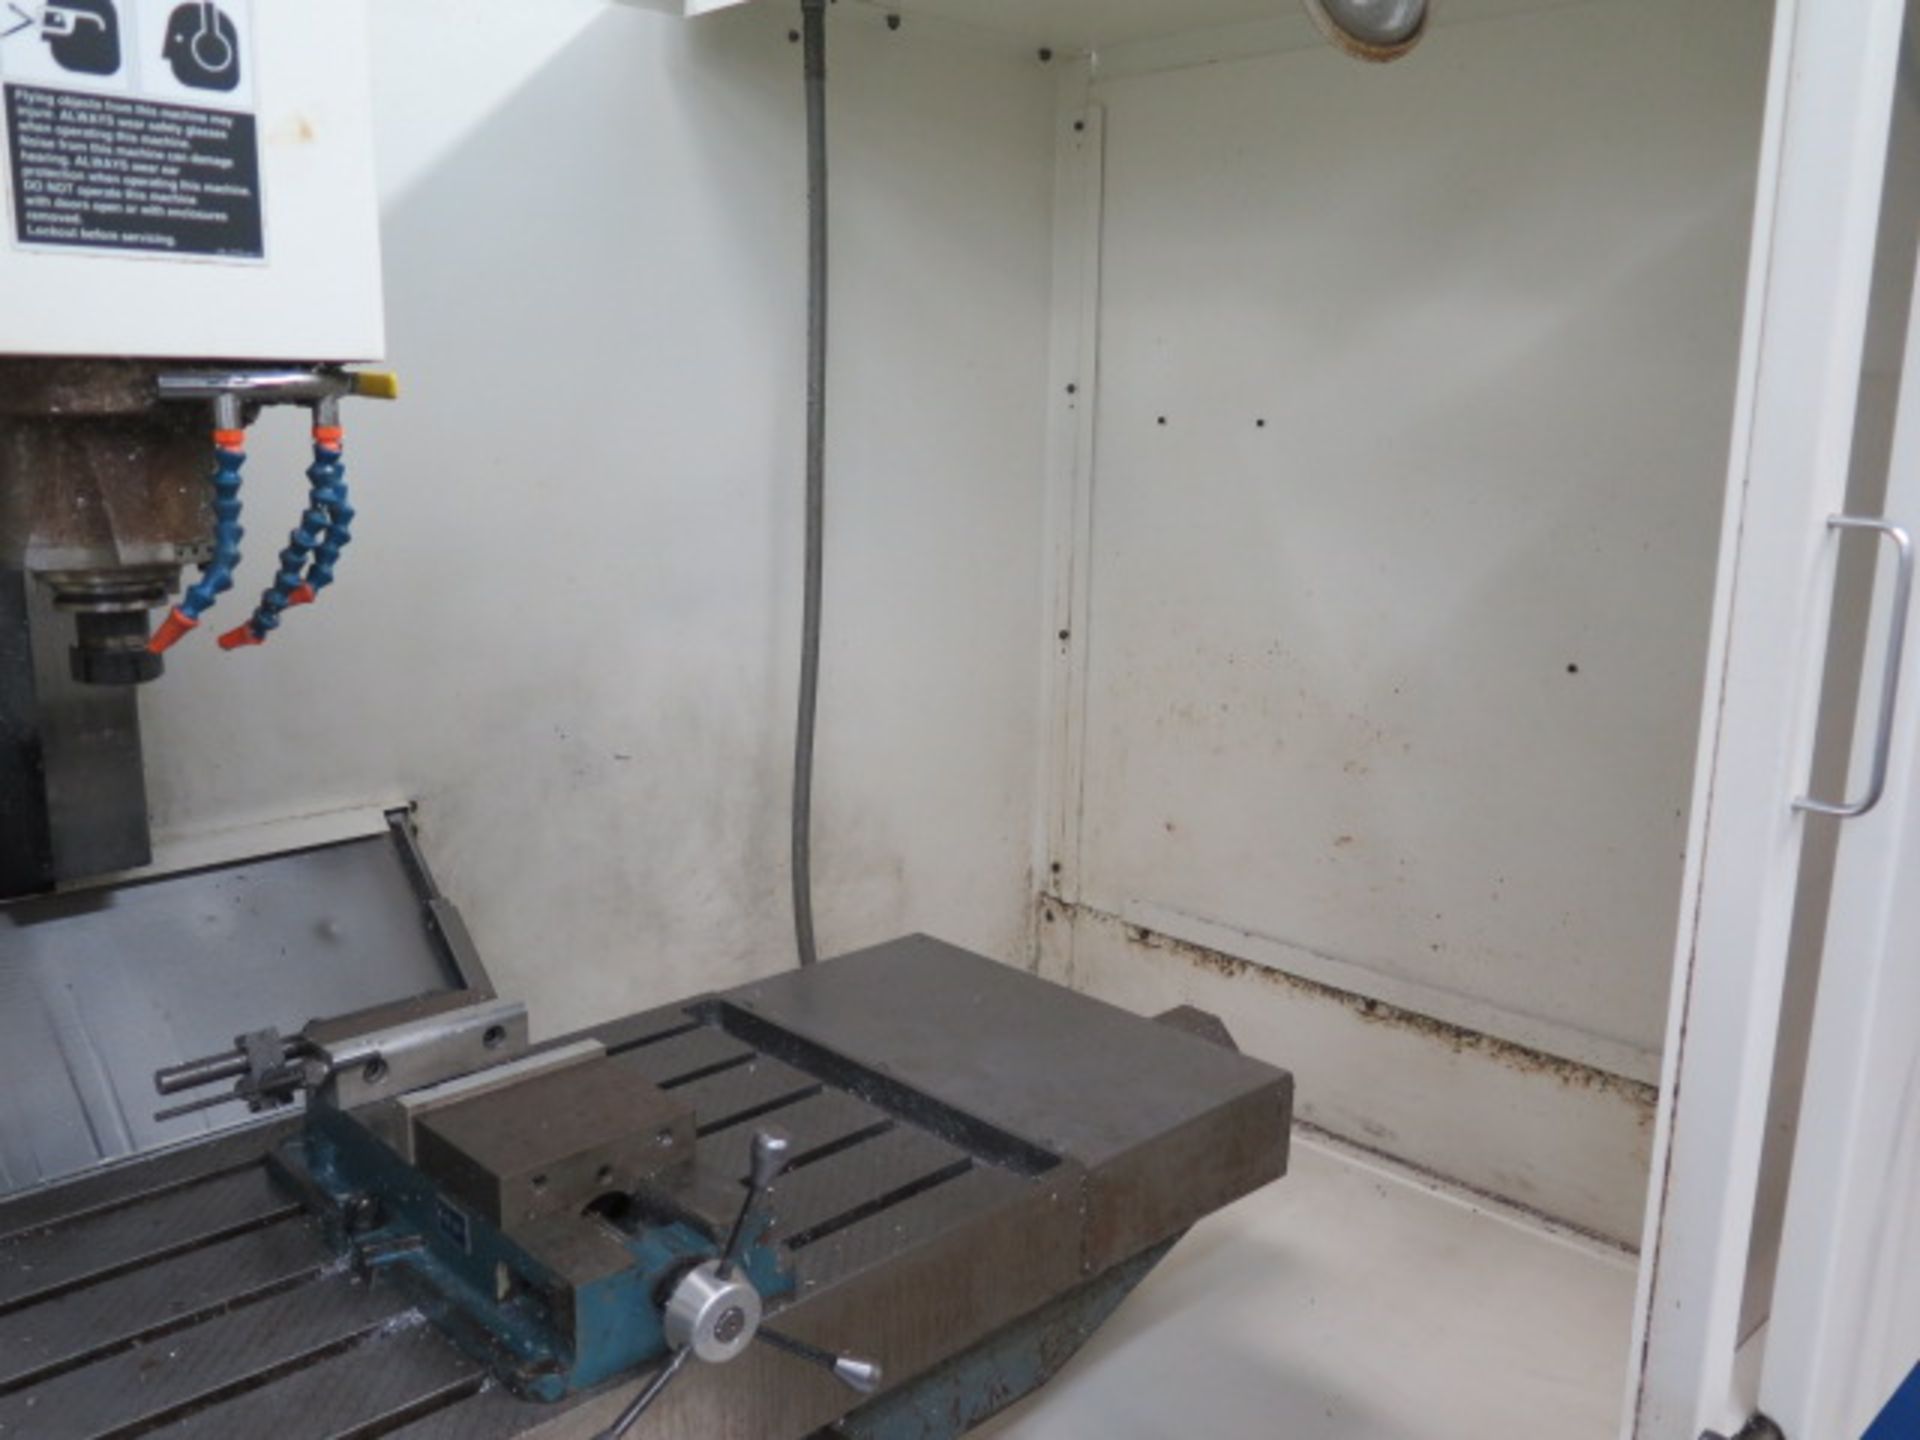 2013 Fadal VMC4020 CNC Vertical Machining Center s/n 1303070690 ( Wesco Factory Rebuilt in 2013 ) w/ - Image 8 of 12